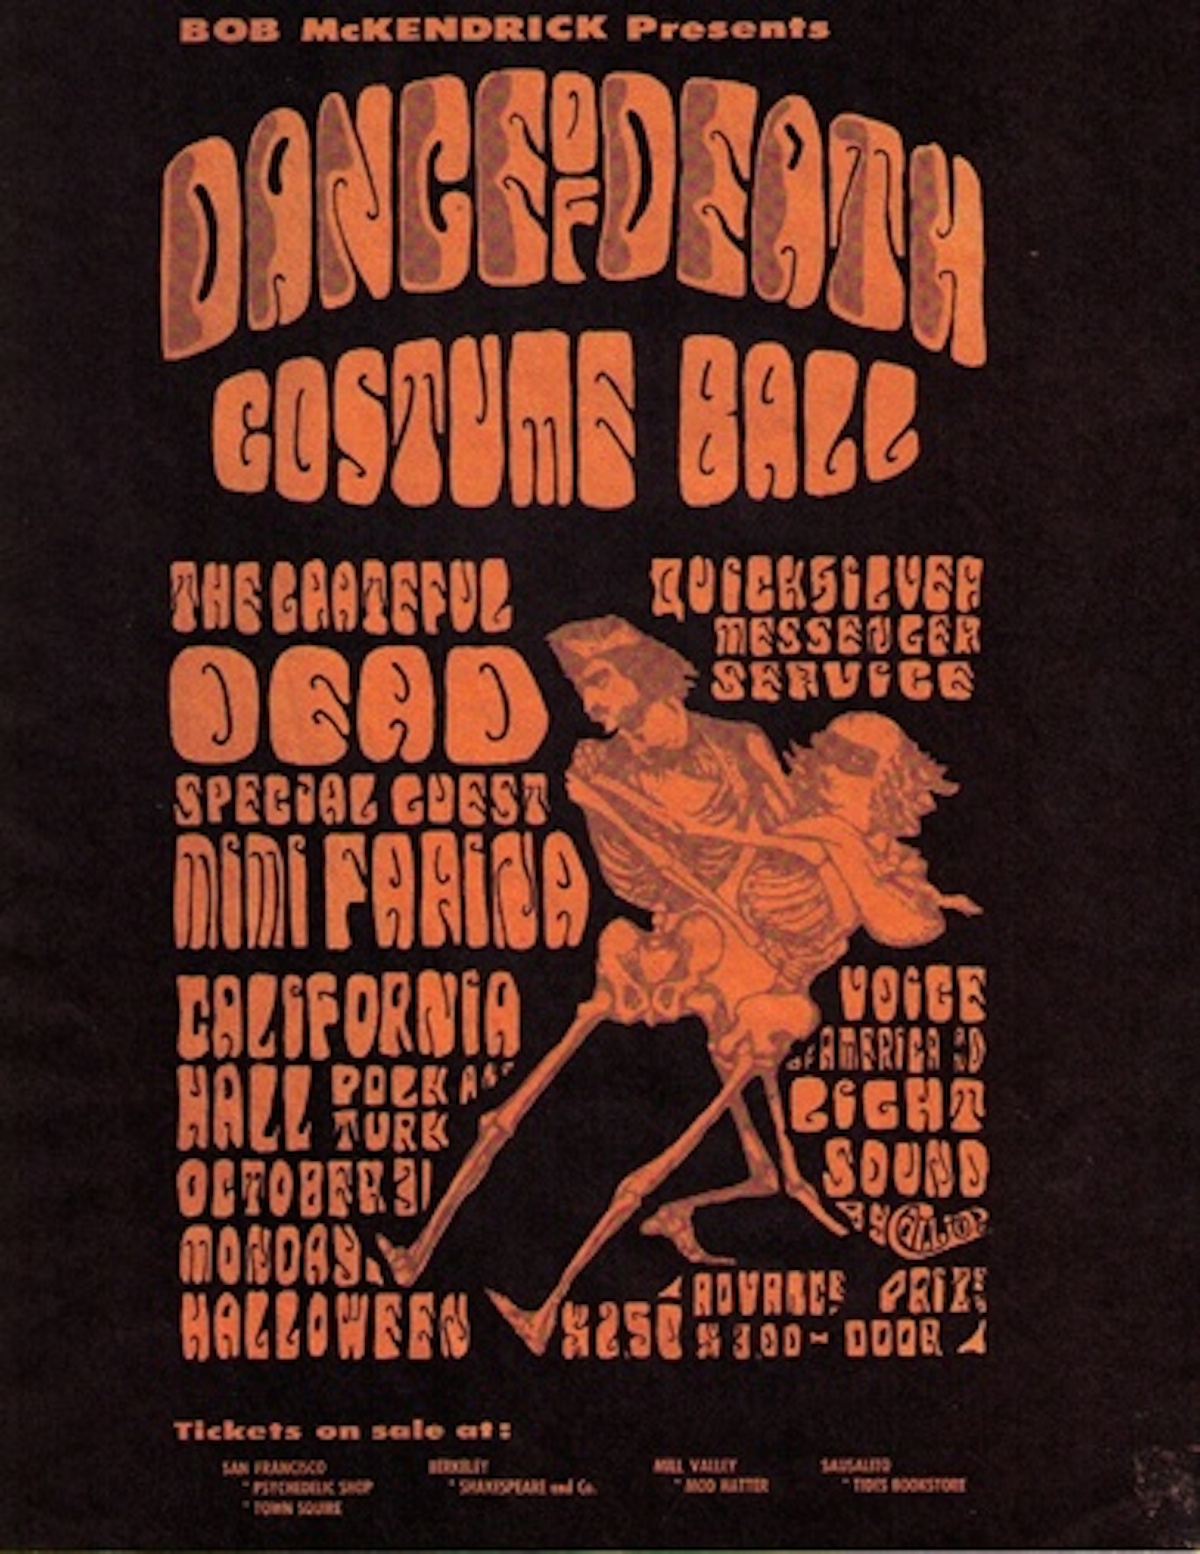 The Dance of Death Costume Ball was held on the same night as the acid test graduation ceremony in 1966.